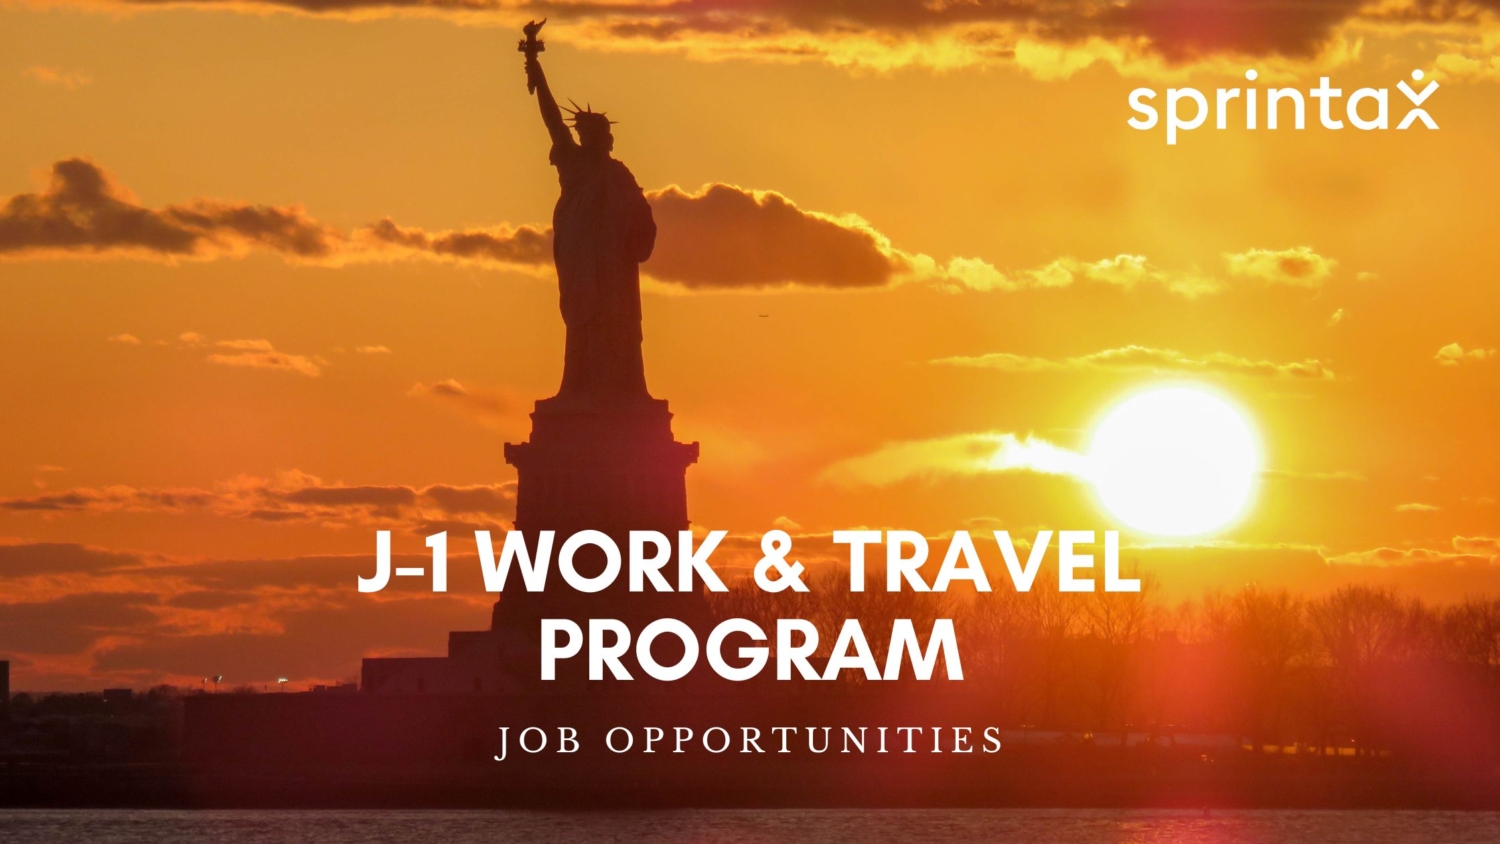 J-1 Summer Work and Travel jobs